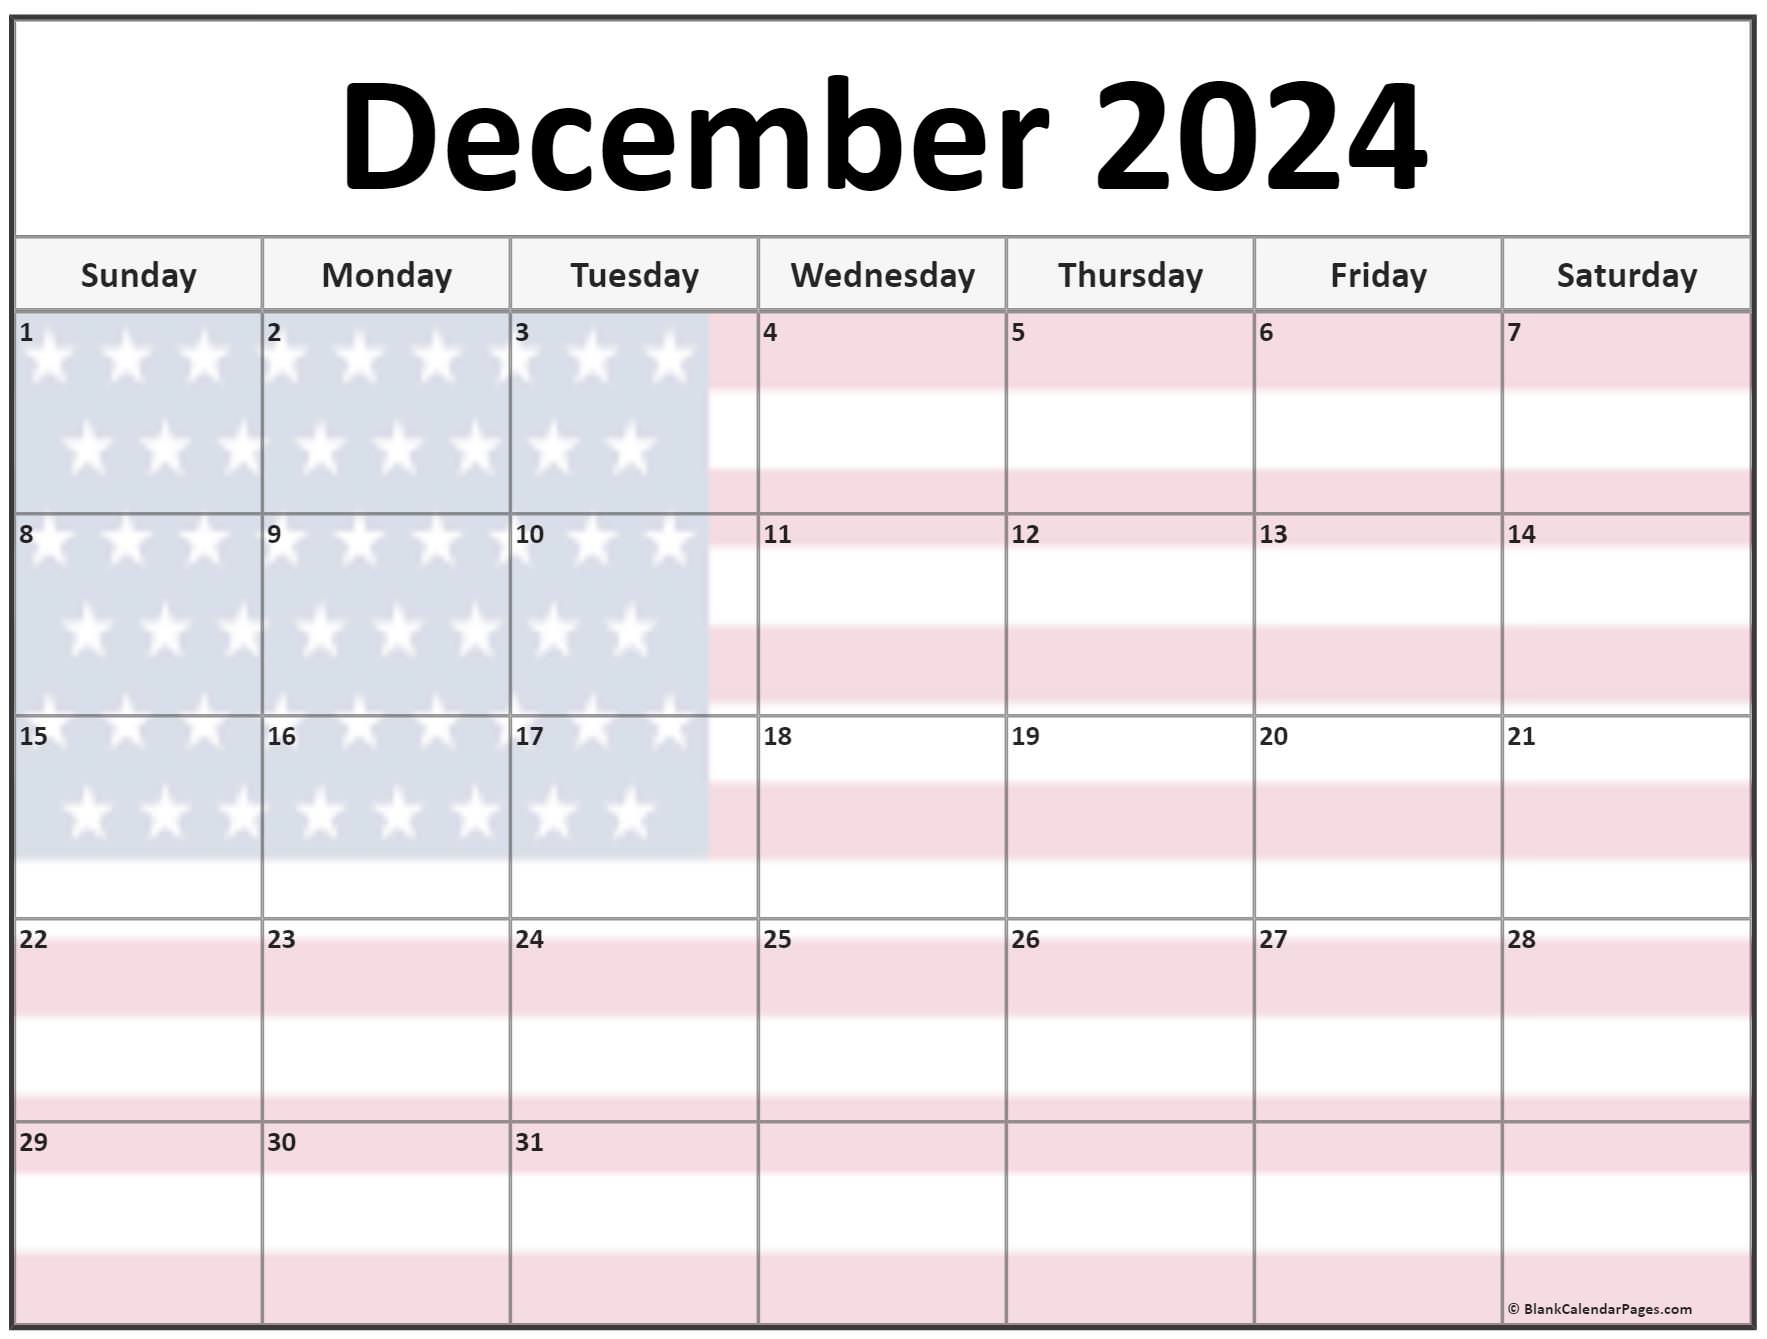 Collection of December 2024 photo calendars with image filters.